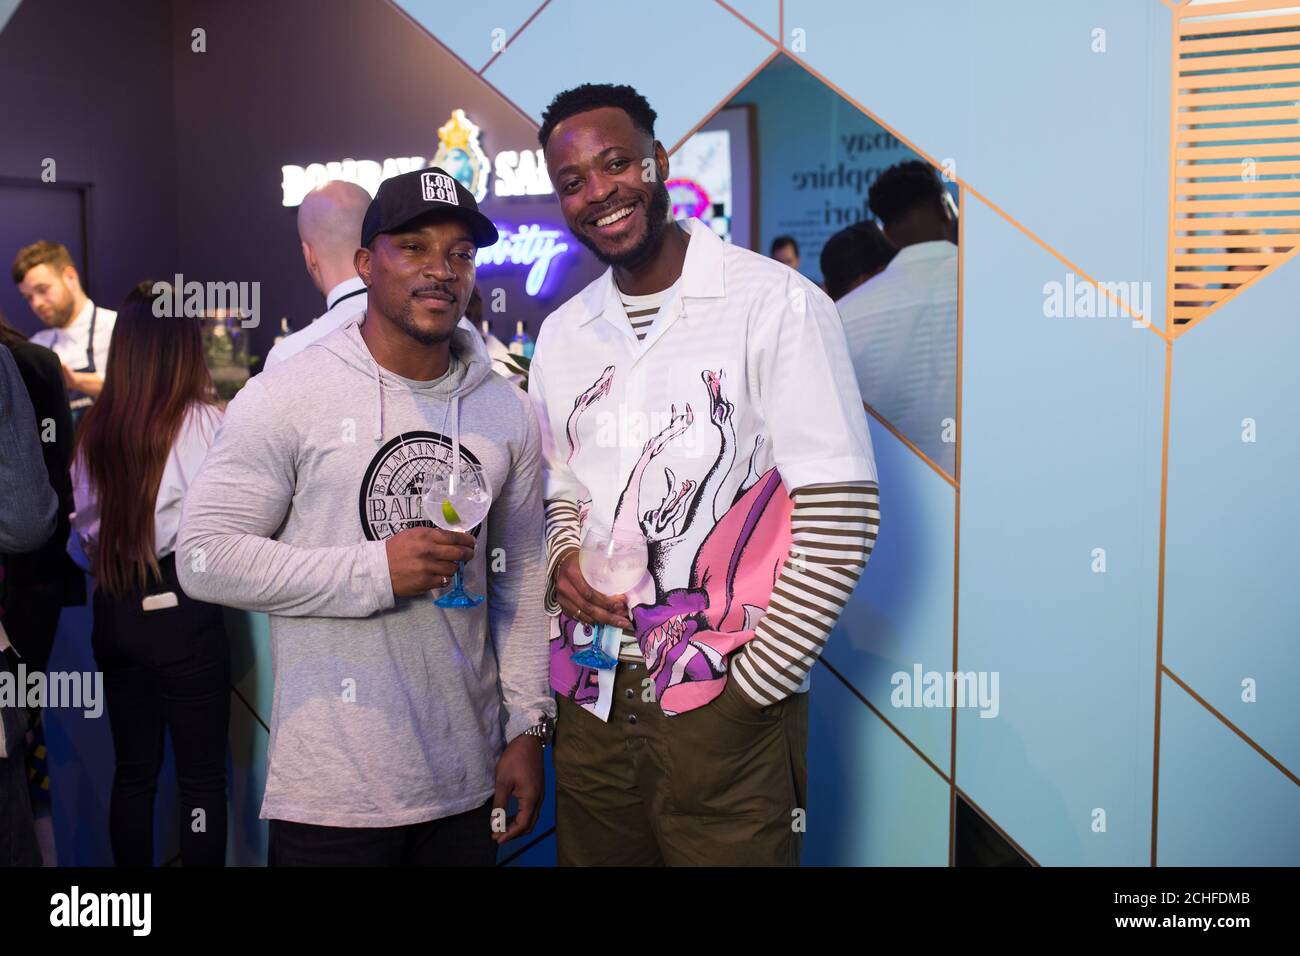 EDITORIAL USE ONLY Yinka Ilori and Ashley Walters at the Bombay Sapphire Stir Creativity Lounge at Frieze London, where the gin brand is launching a new Artificial Intelligence art collection in collaboration with artist Yinka Ilori. Stock Photo